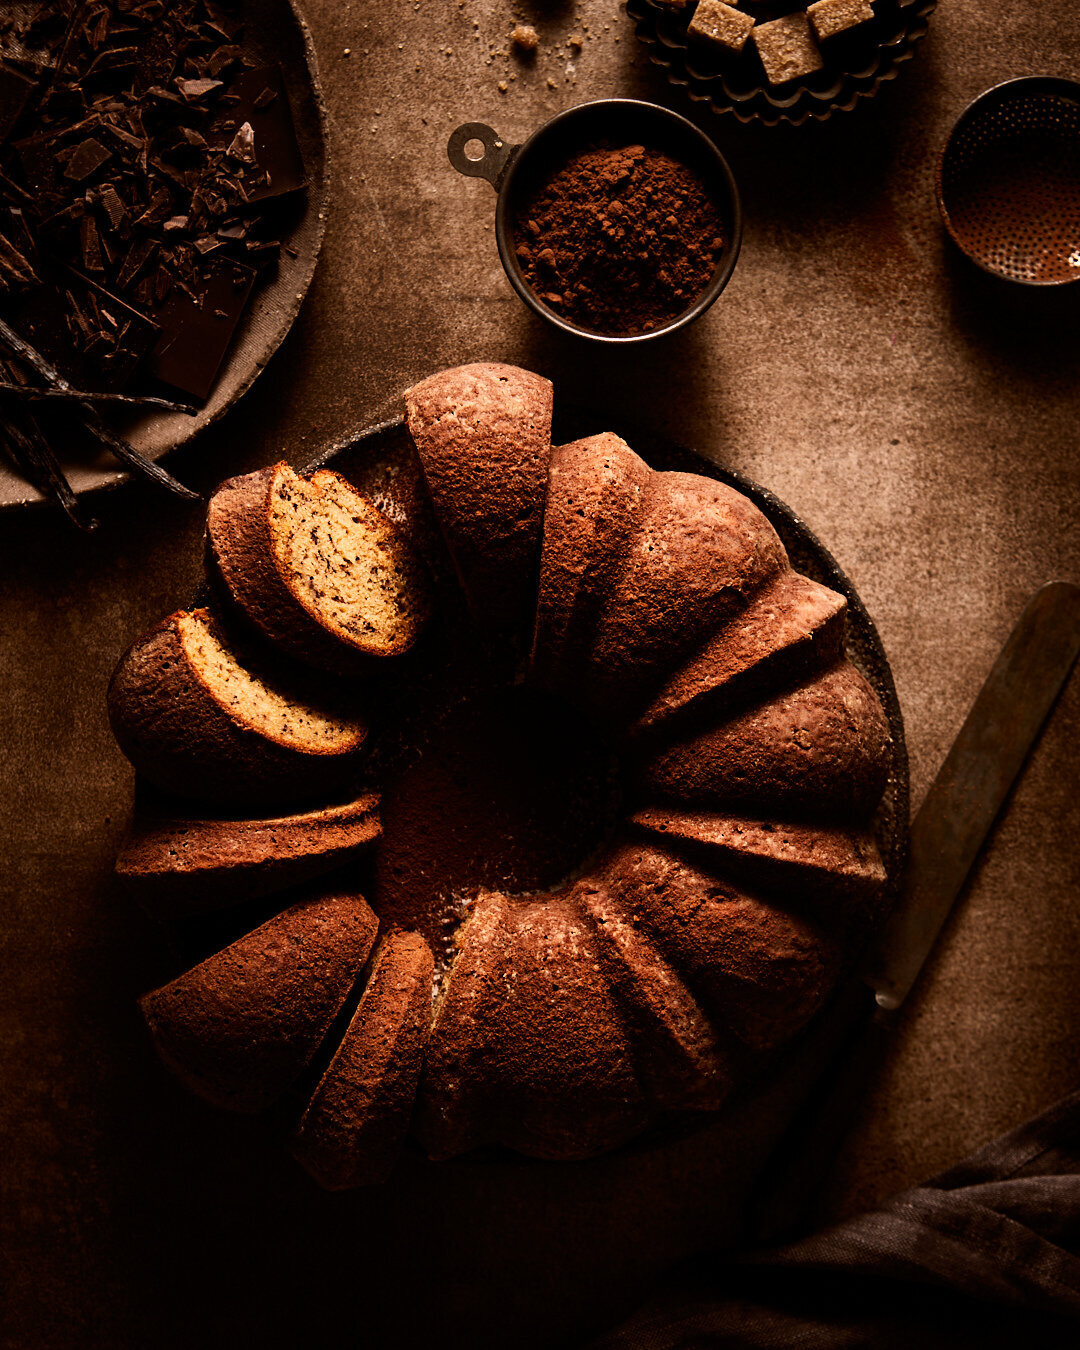 Dark image of a chocolate bundt cake with a few pieces that are sliced.